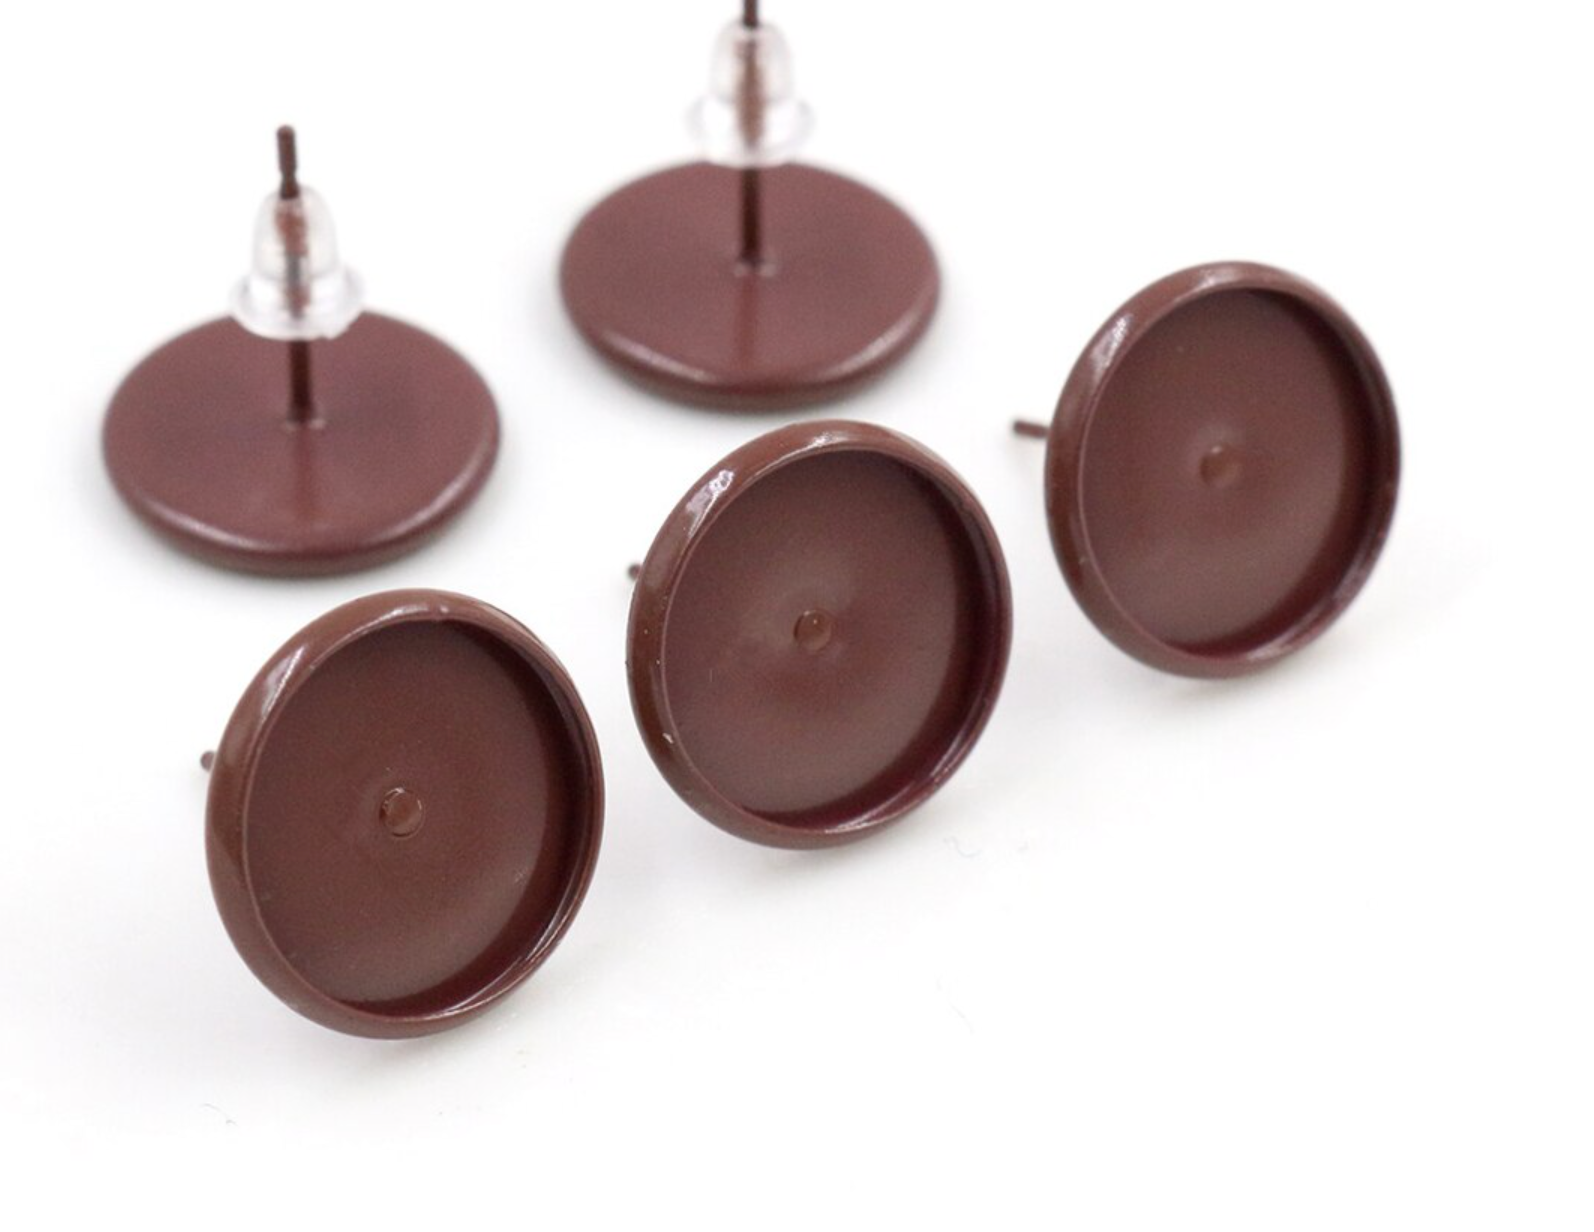 4pcs, 12mm Tray, Color Plated Earring Studs / Settings, Earrings Blank, Lead free and nickel free in Brown